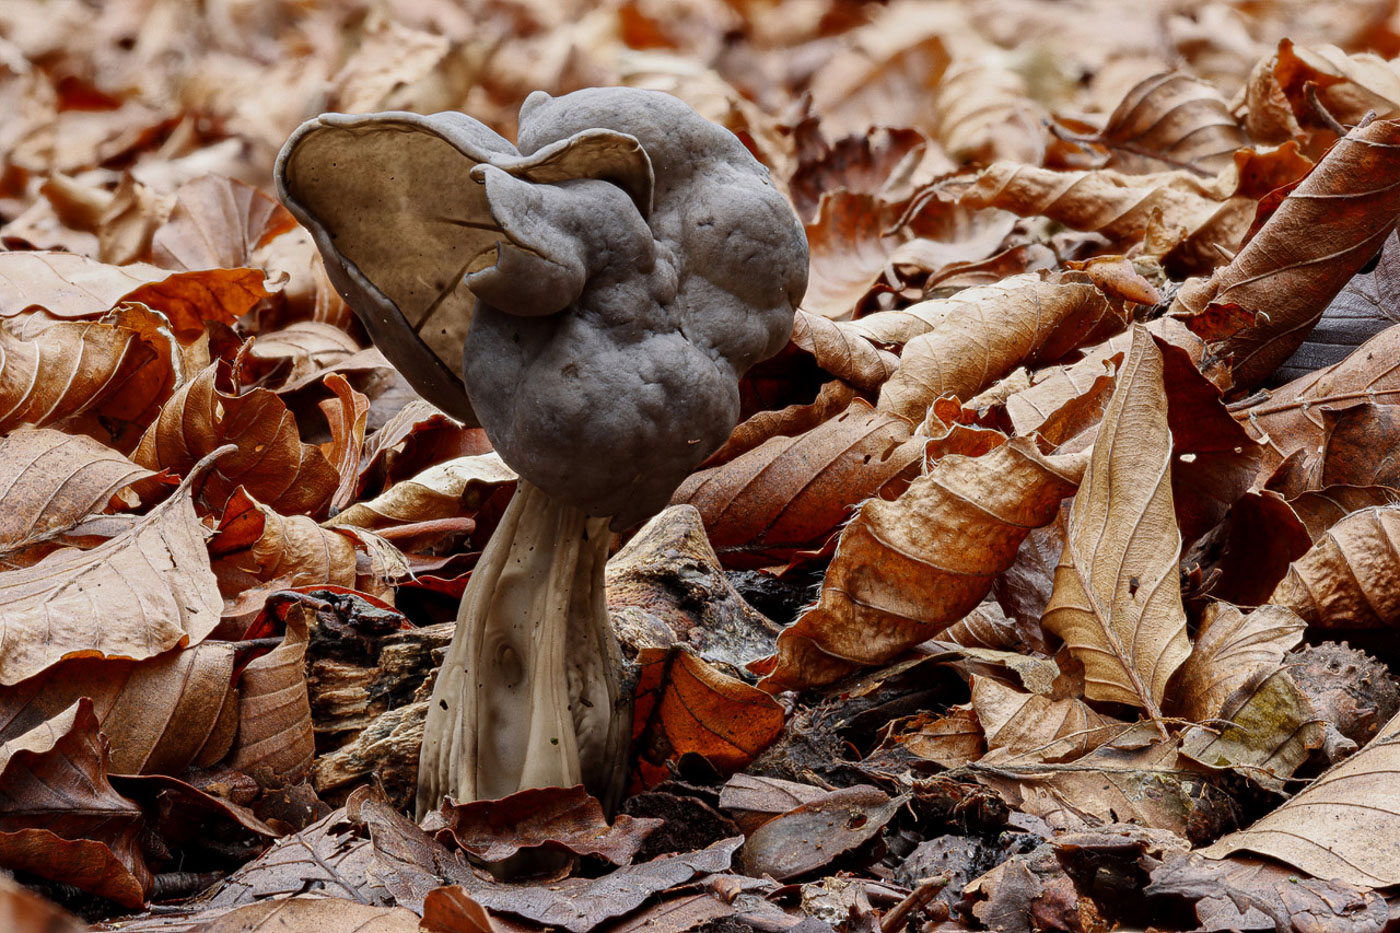 Helvella lacunosa by Paul Goby